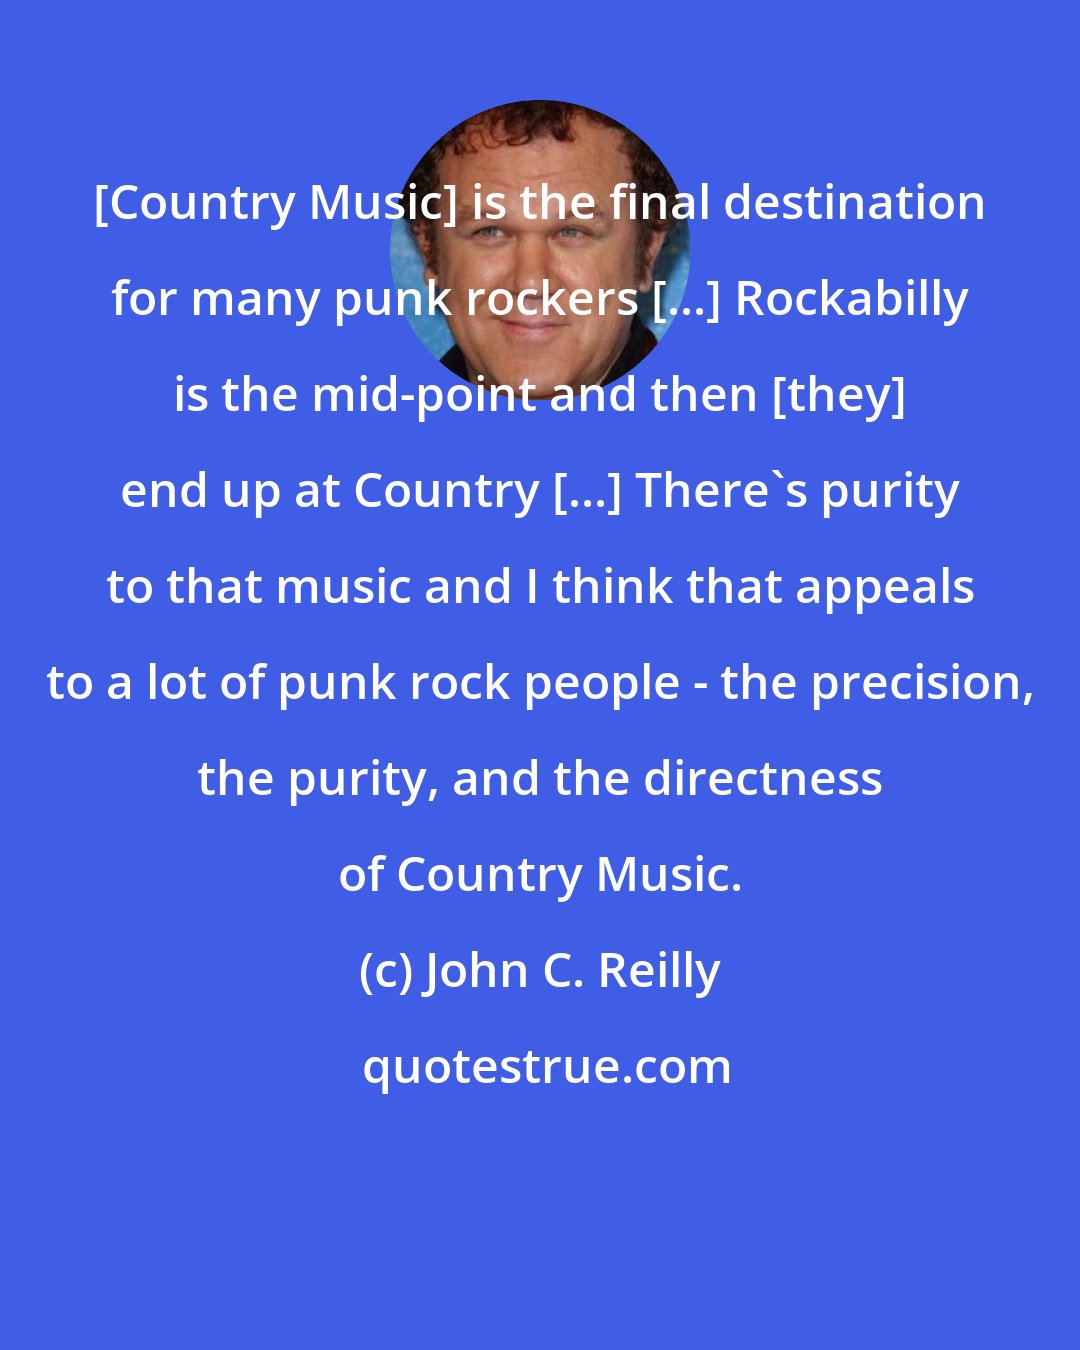 John C. Reilly: [Country Music] is the final destination for many punk rockers [...] Rockabilly is the mid-point and then [they] end up at Country [...] There's purity to that music and I think that appeals to a lot of punk rock people - the precision, the purity, and the directness of Country Music.